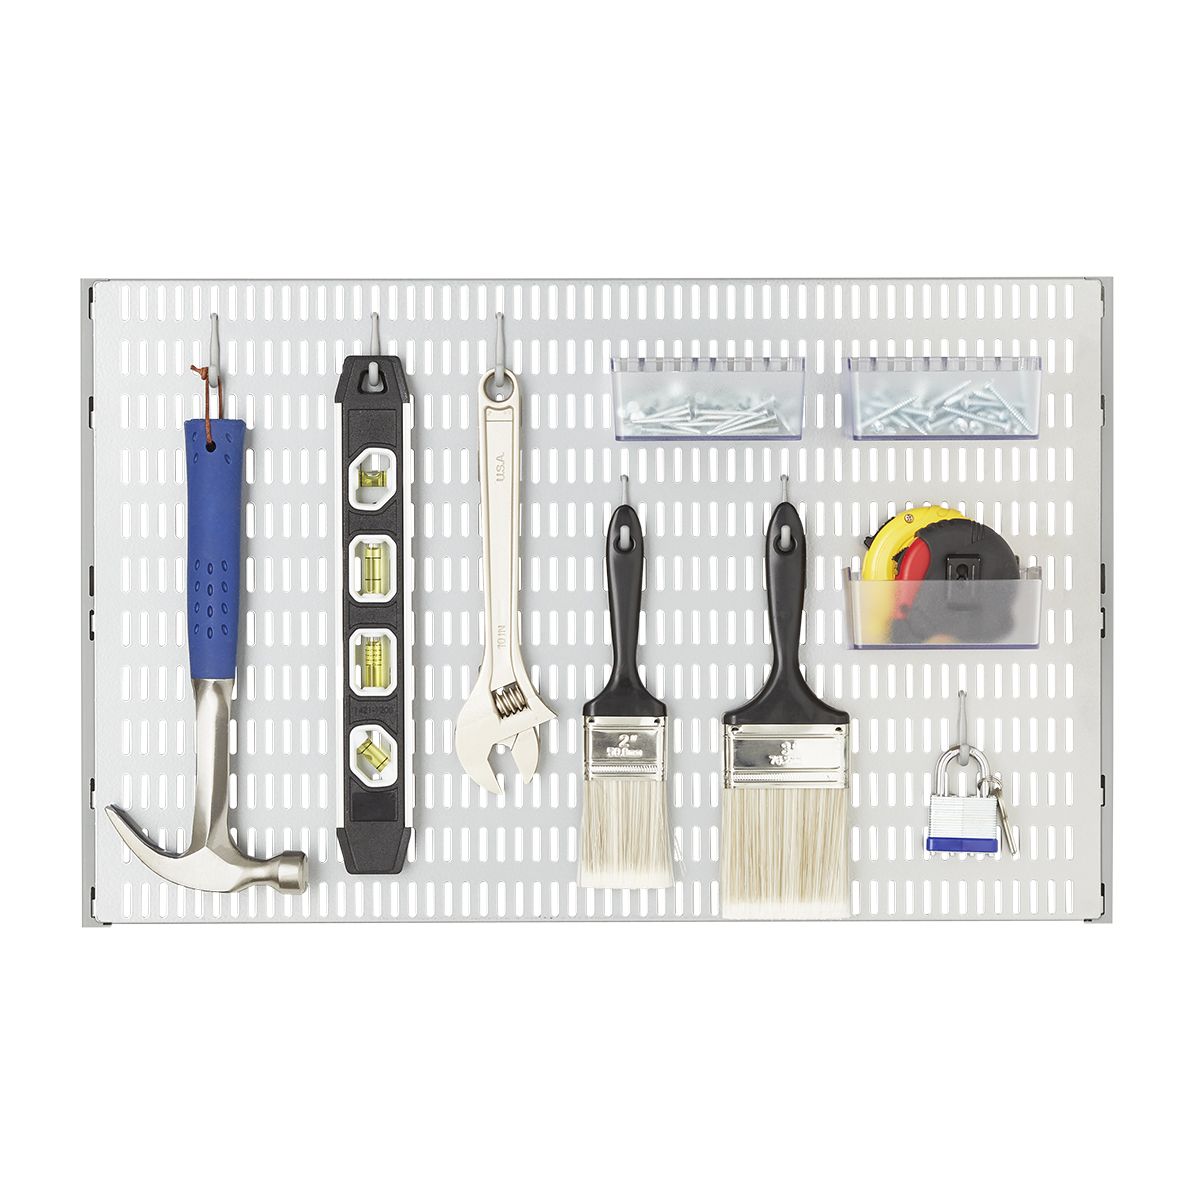 Utility Board Starter Kit | The Container Store